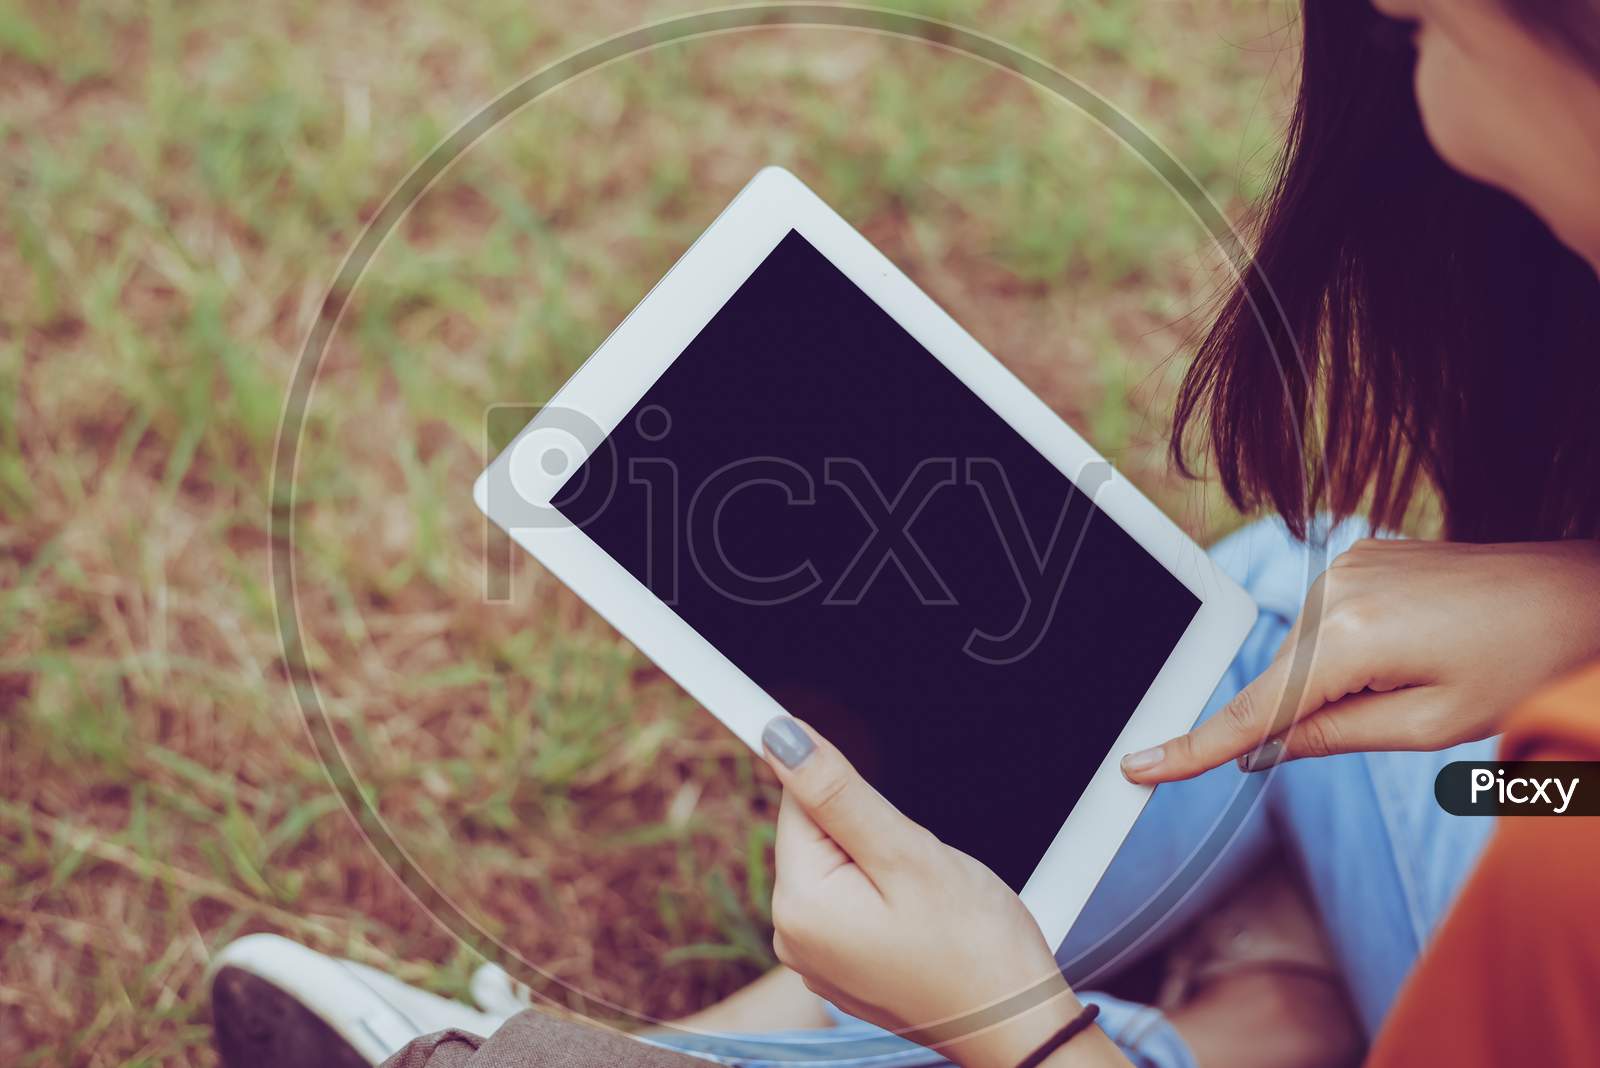 Beauty Asian Woman Using Tablet At Park. People And Technology Concept. Leisure And Outdoor Activity Theme.